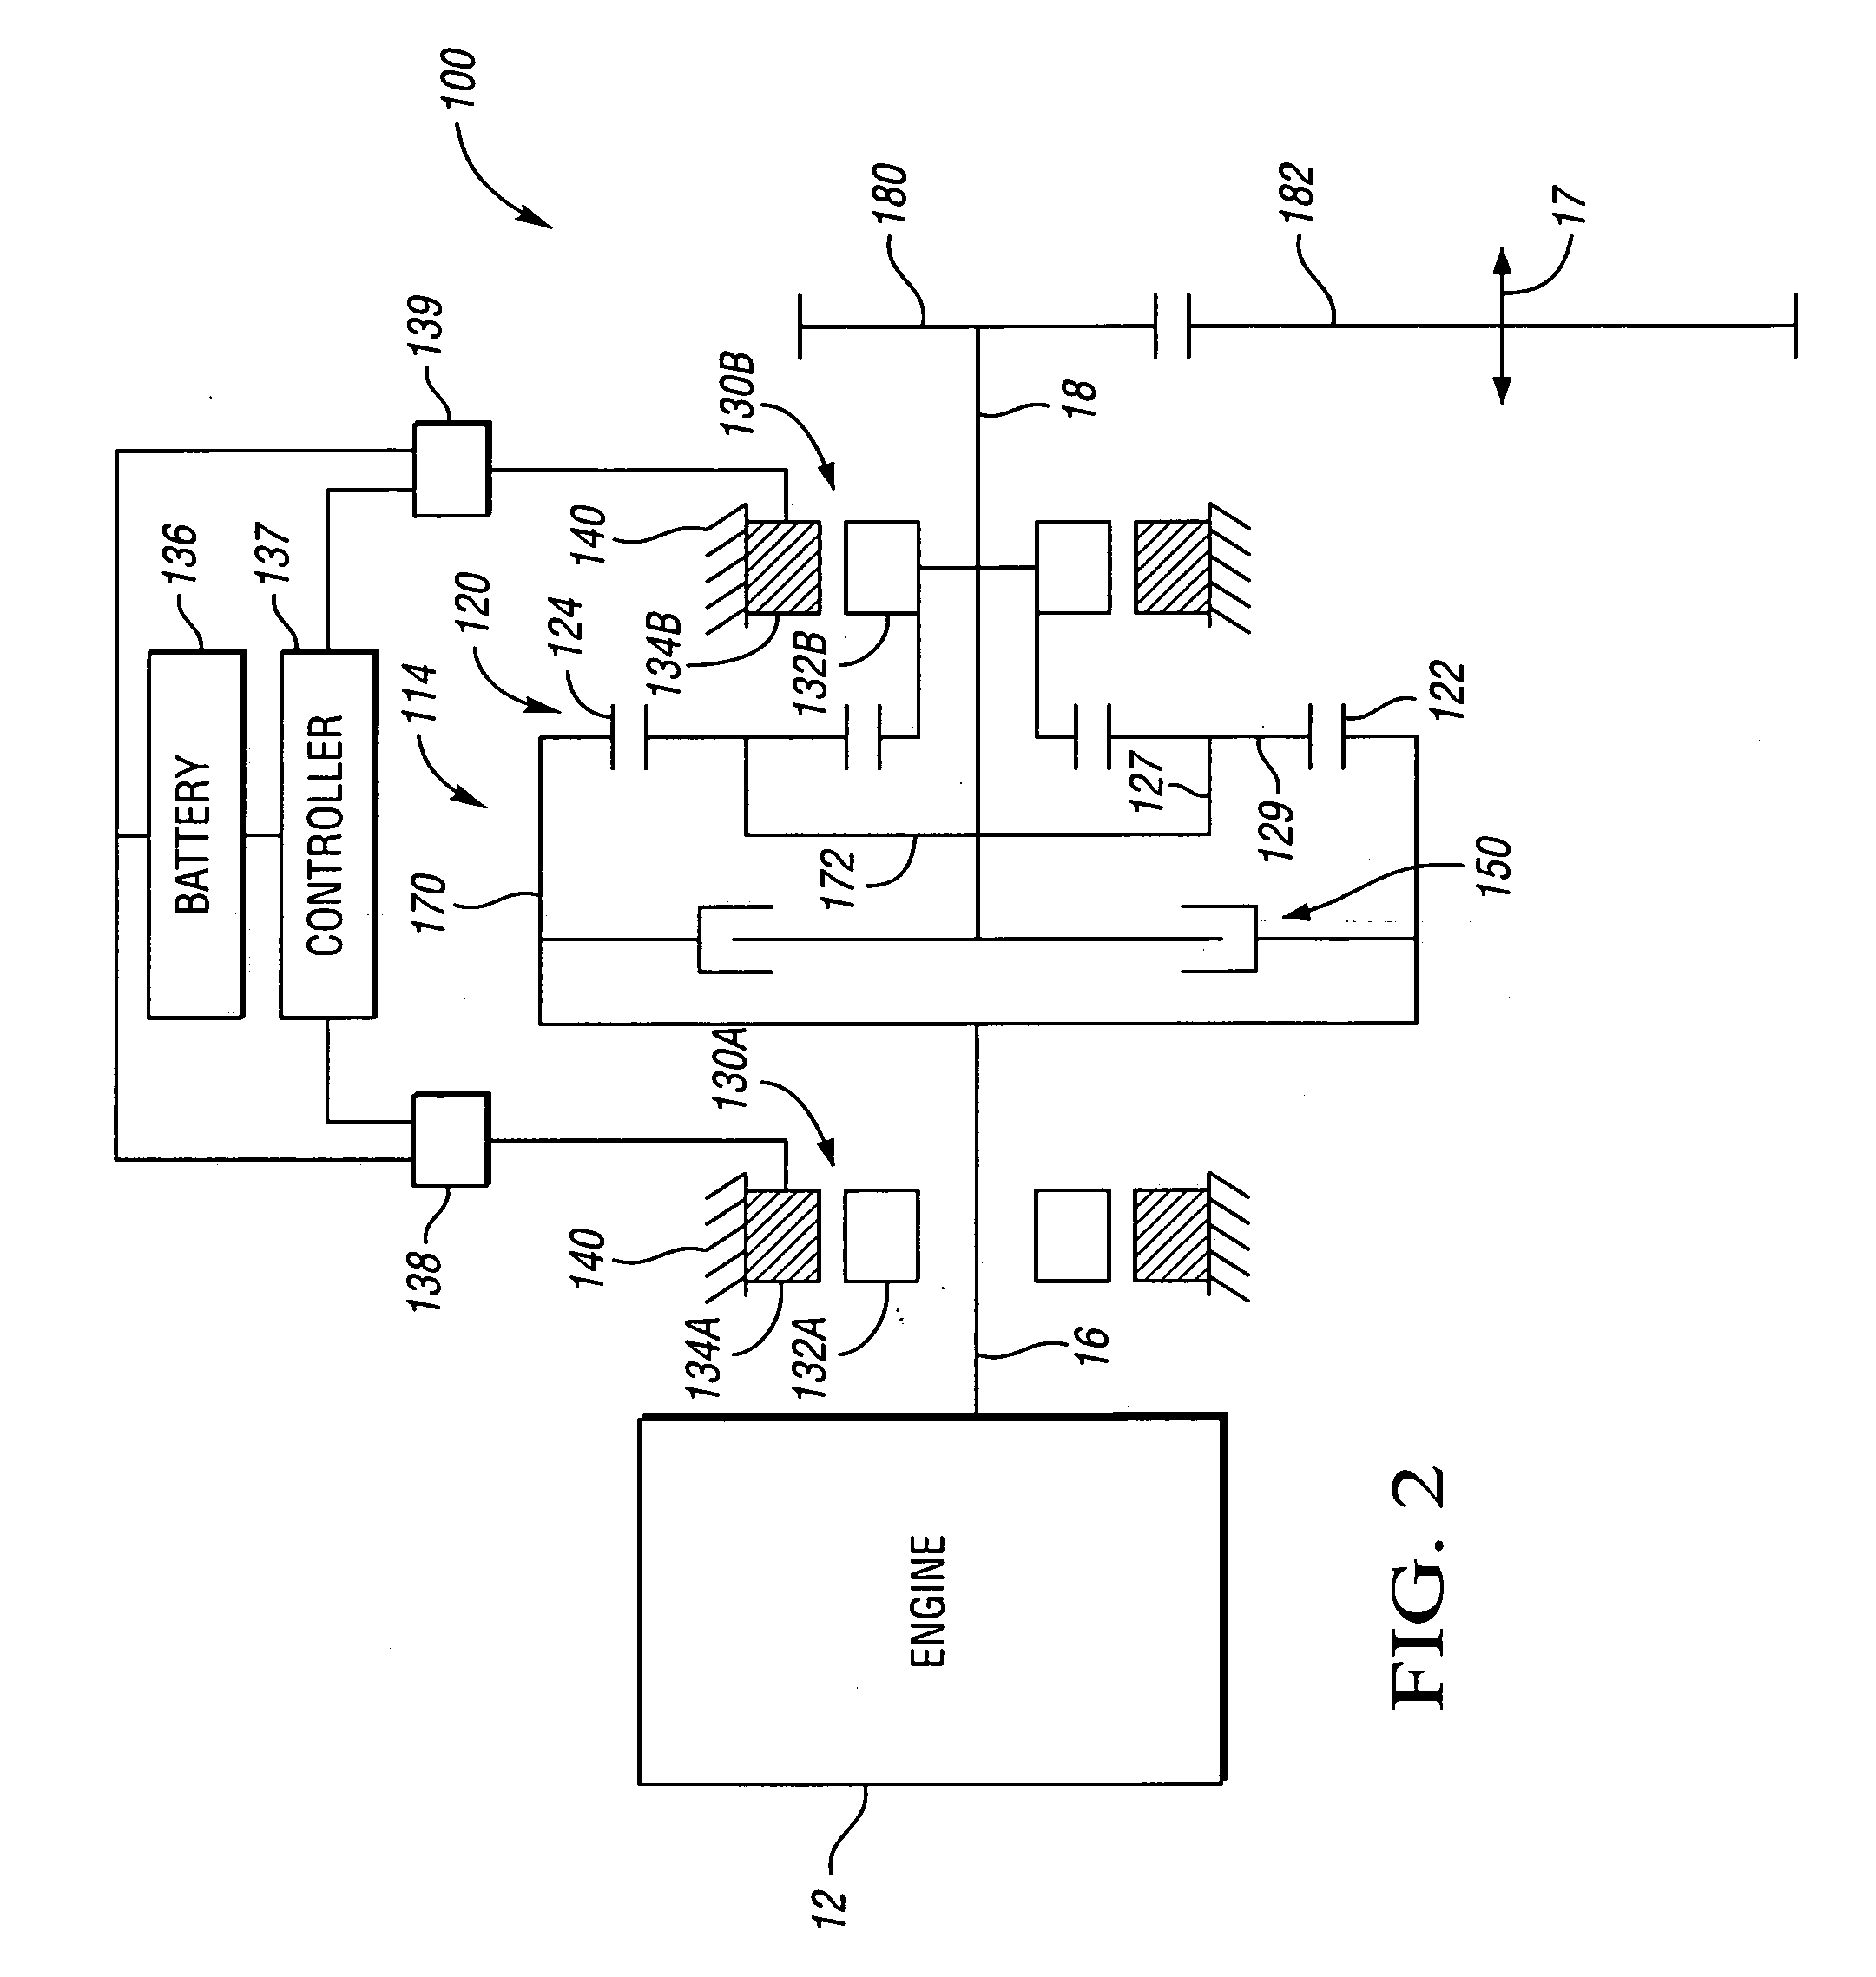 Single range electrically variable transmission with lockup clutch and method of operation